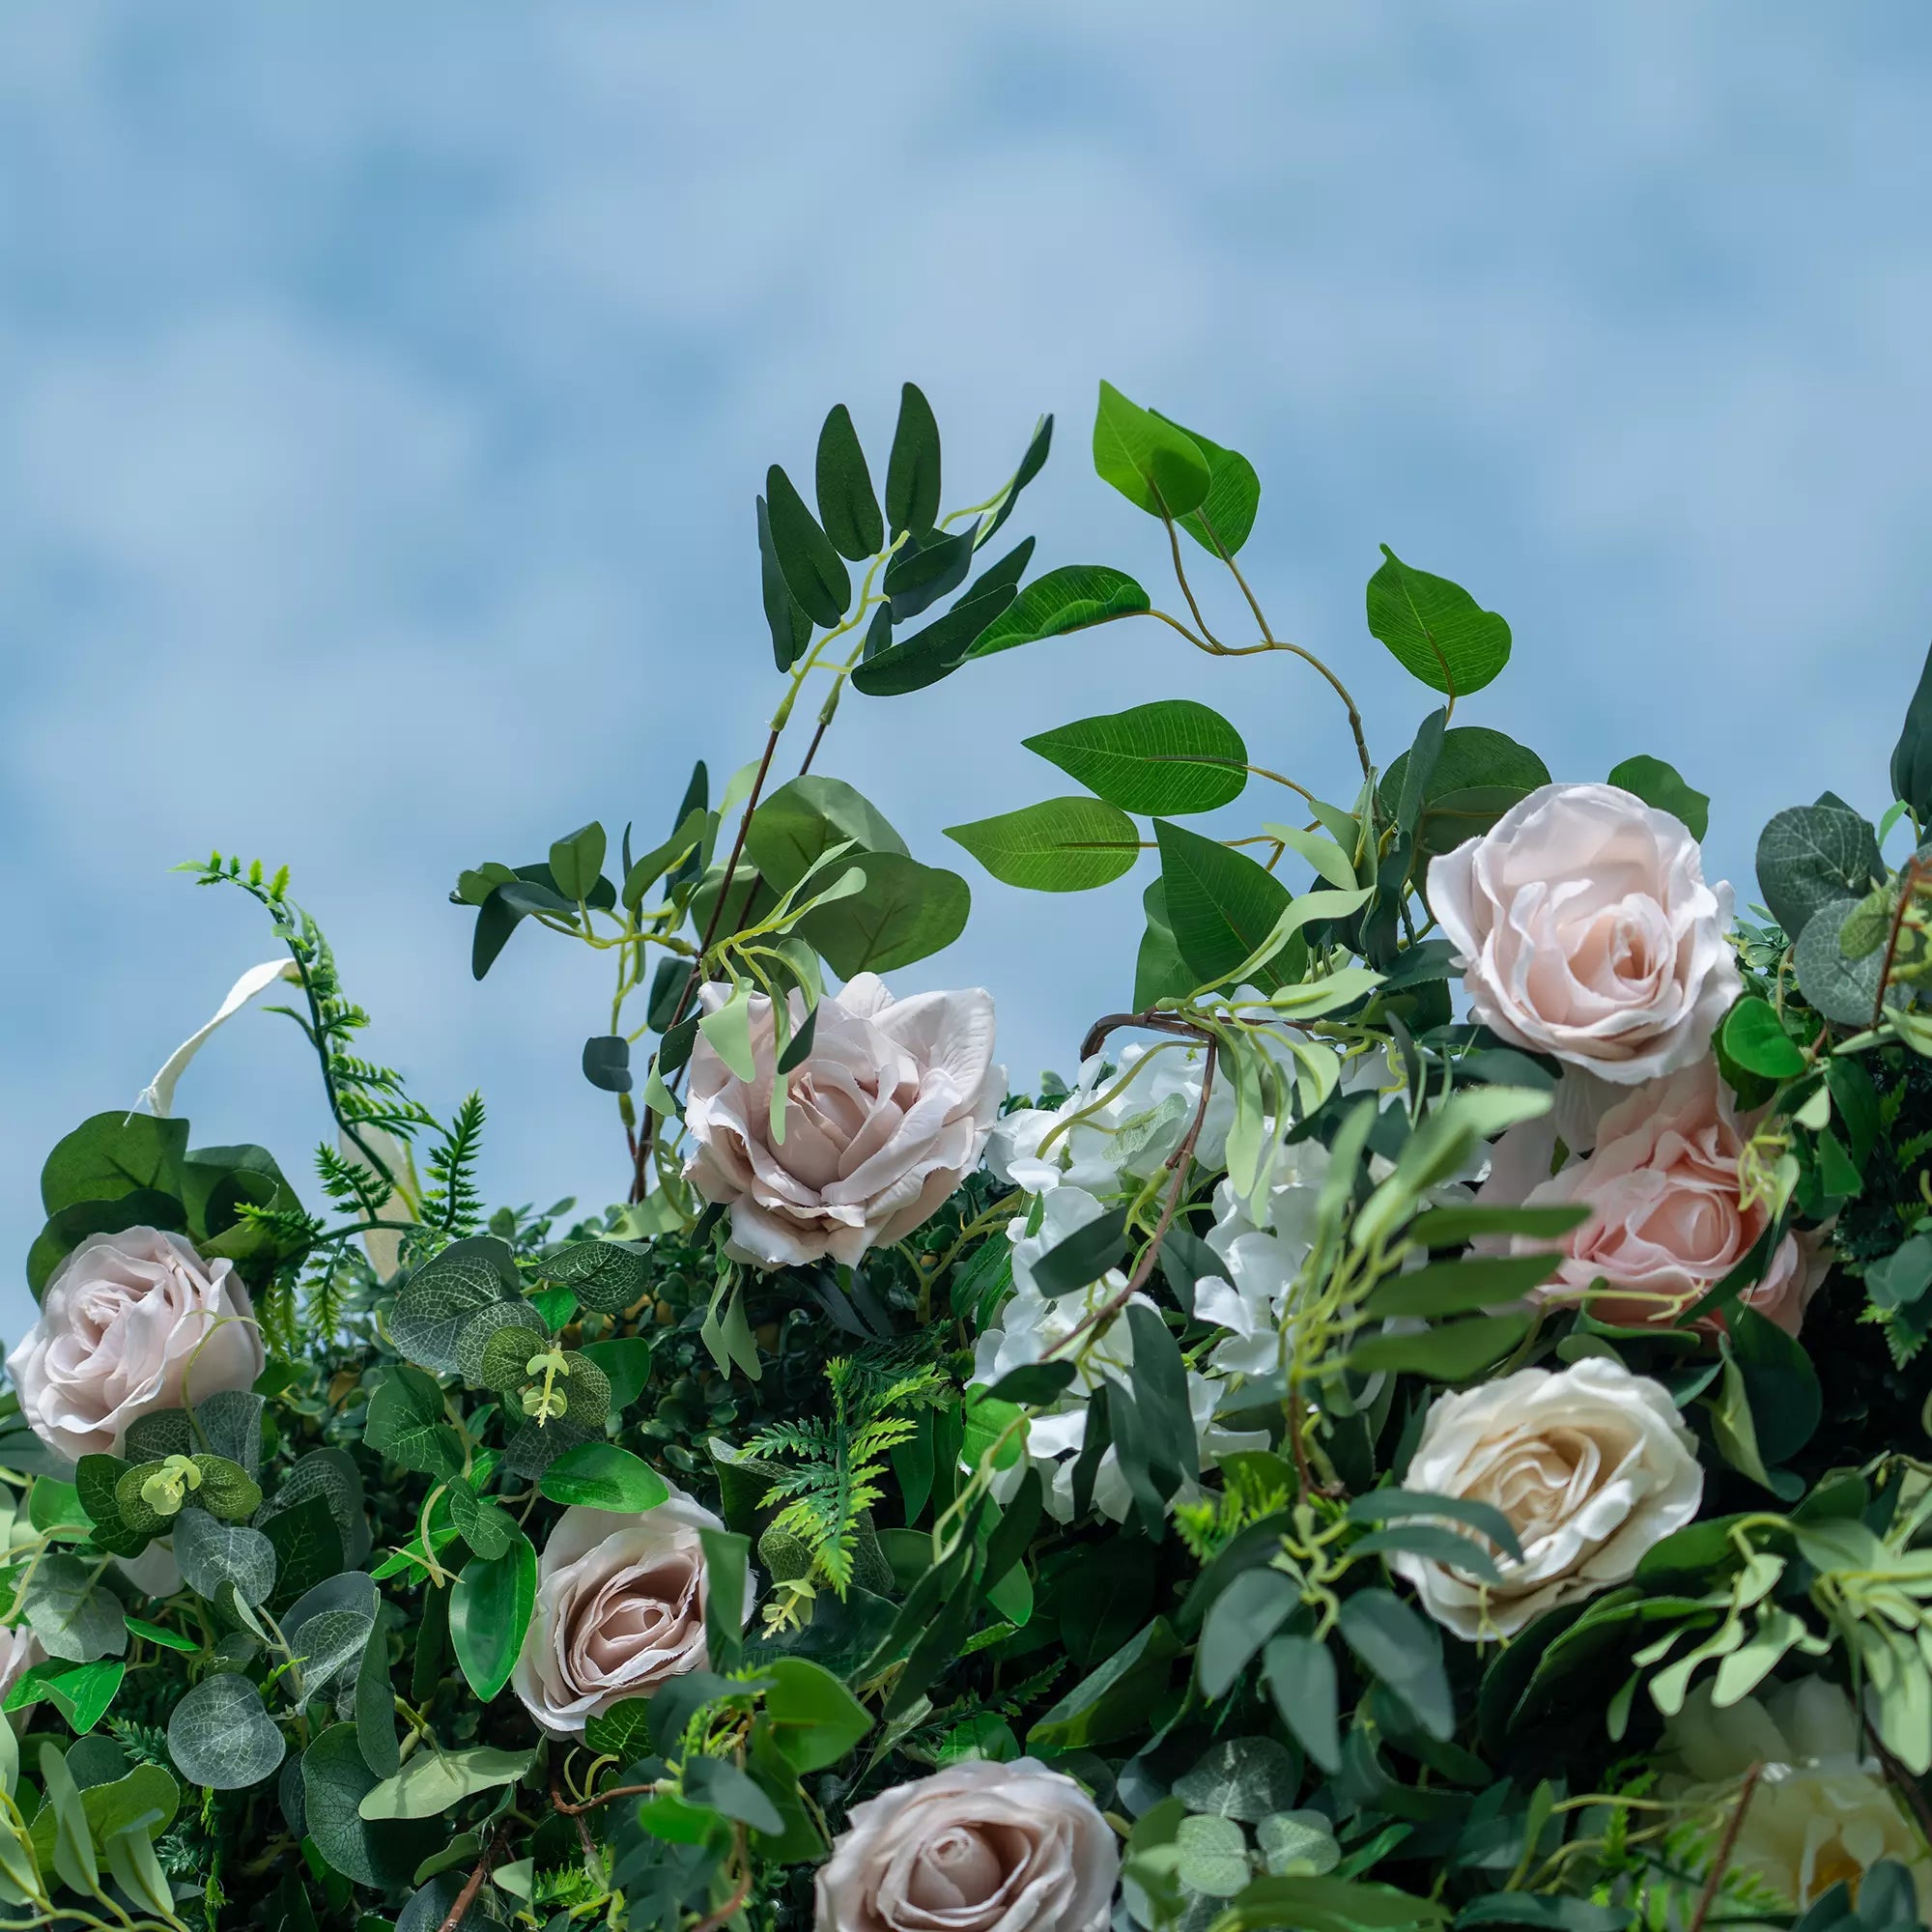 Elevate any event with the "Valar Flowers" Deluxe Floral Wall. Handcrafted with premium artificial roses, it's the ideal backdrop for memorable photos. Perfect for weddings, parties & more. Durable & UV resistant. A blend of luxury & nature's beauty.